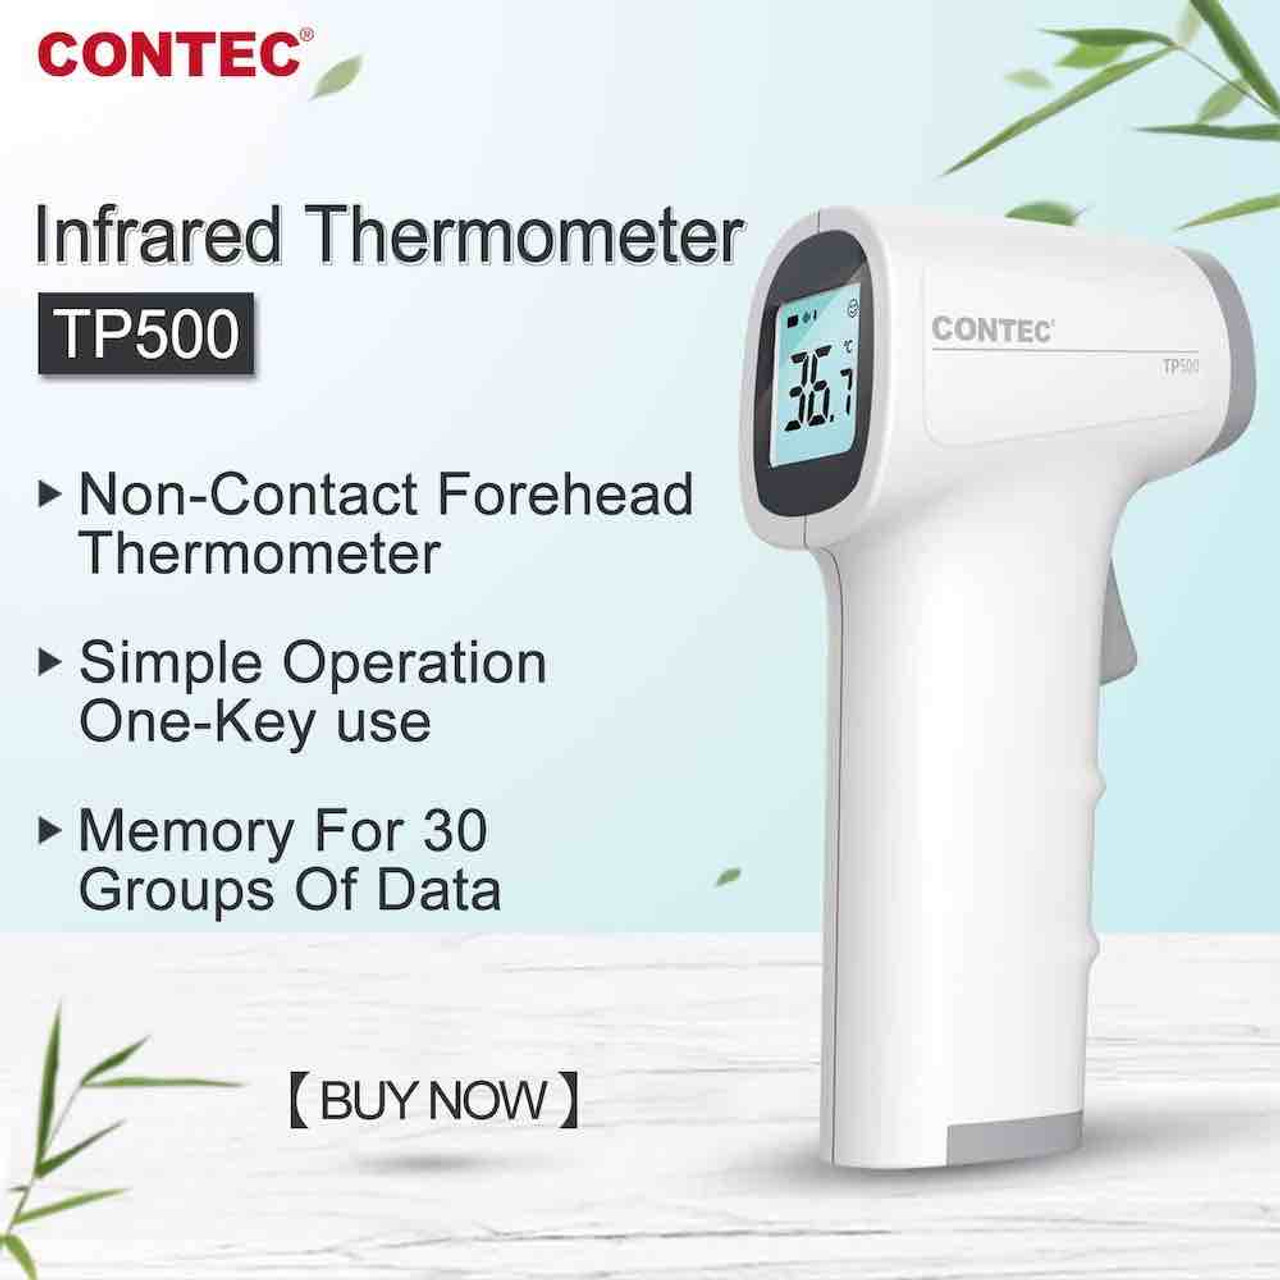 https://cdn11.bigcommerce.com/s-x3ki4mm/images/stencil/1280x1280/products/3215/4373/contect-tp-500-infrared-thermometer__93328.1587917288.jpg?c=2?imbypass=on